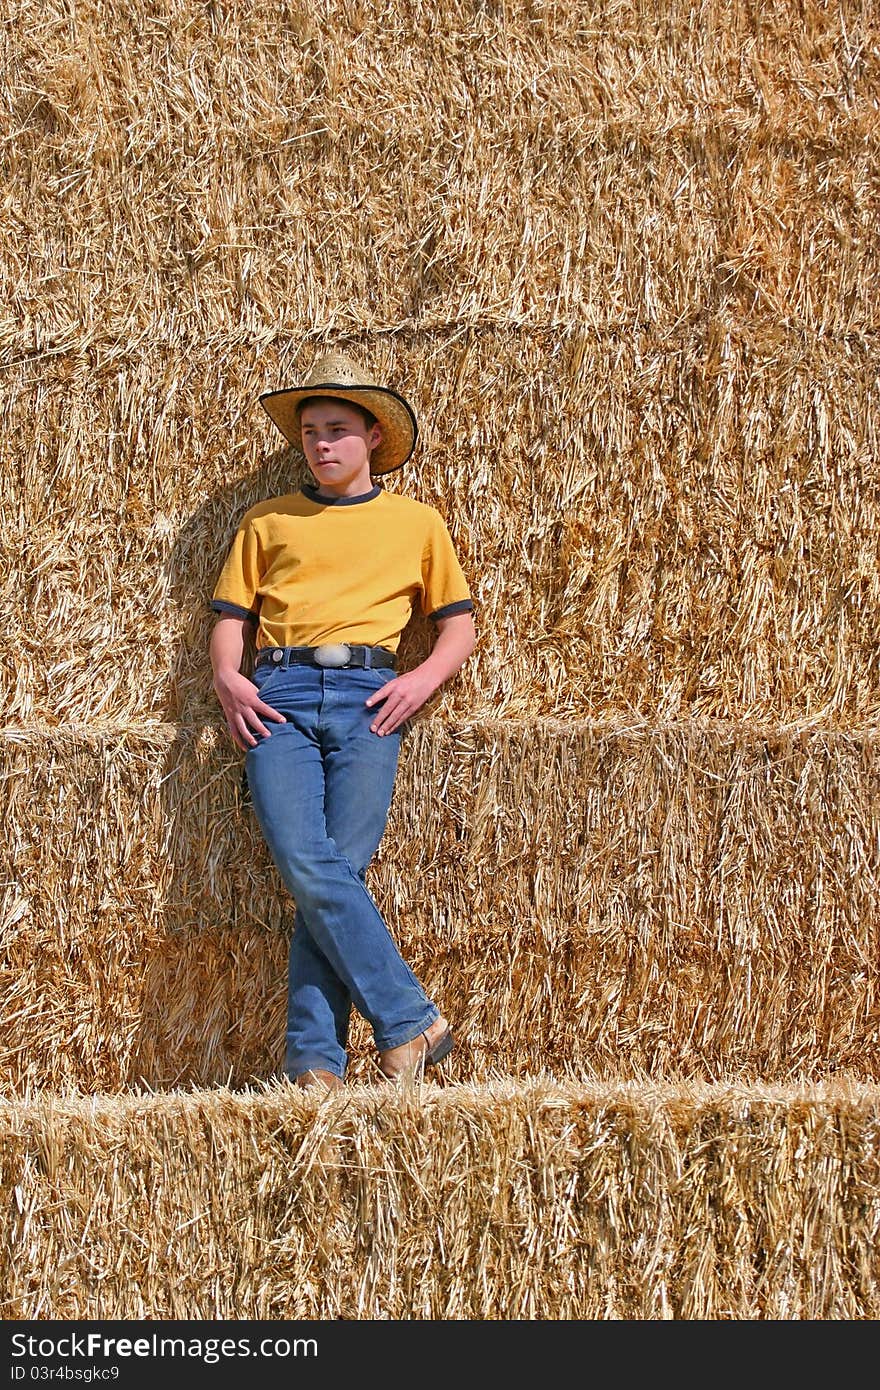 Male cowboy standing on straw stack with cowboy hat wearing yellow shirt and blue jeans in the sun looking off in the distance. Male cowboy standing on straw stack with cowboy hat wearing yellow shirt and blue jeans in the sun looking off in the distance